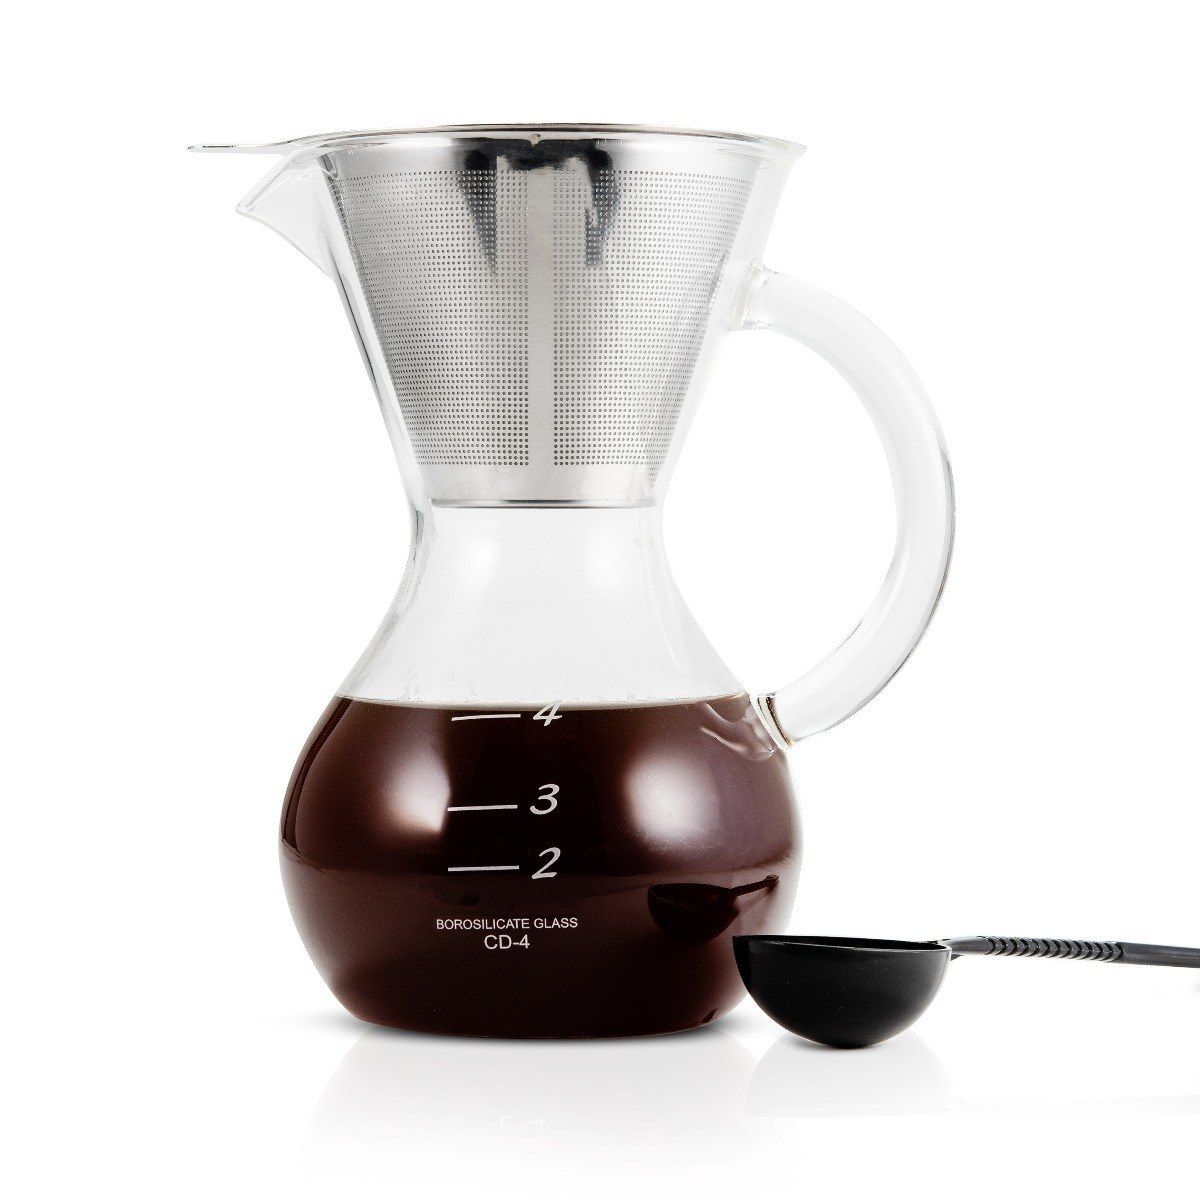 Yama Glass Silverton Coffee Tea with Stainless Cone Filter Clear